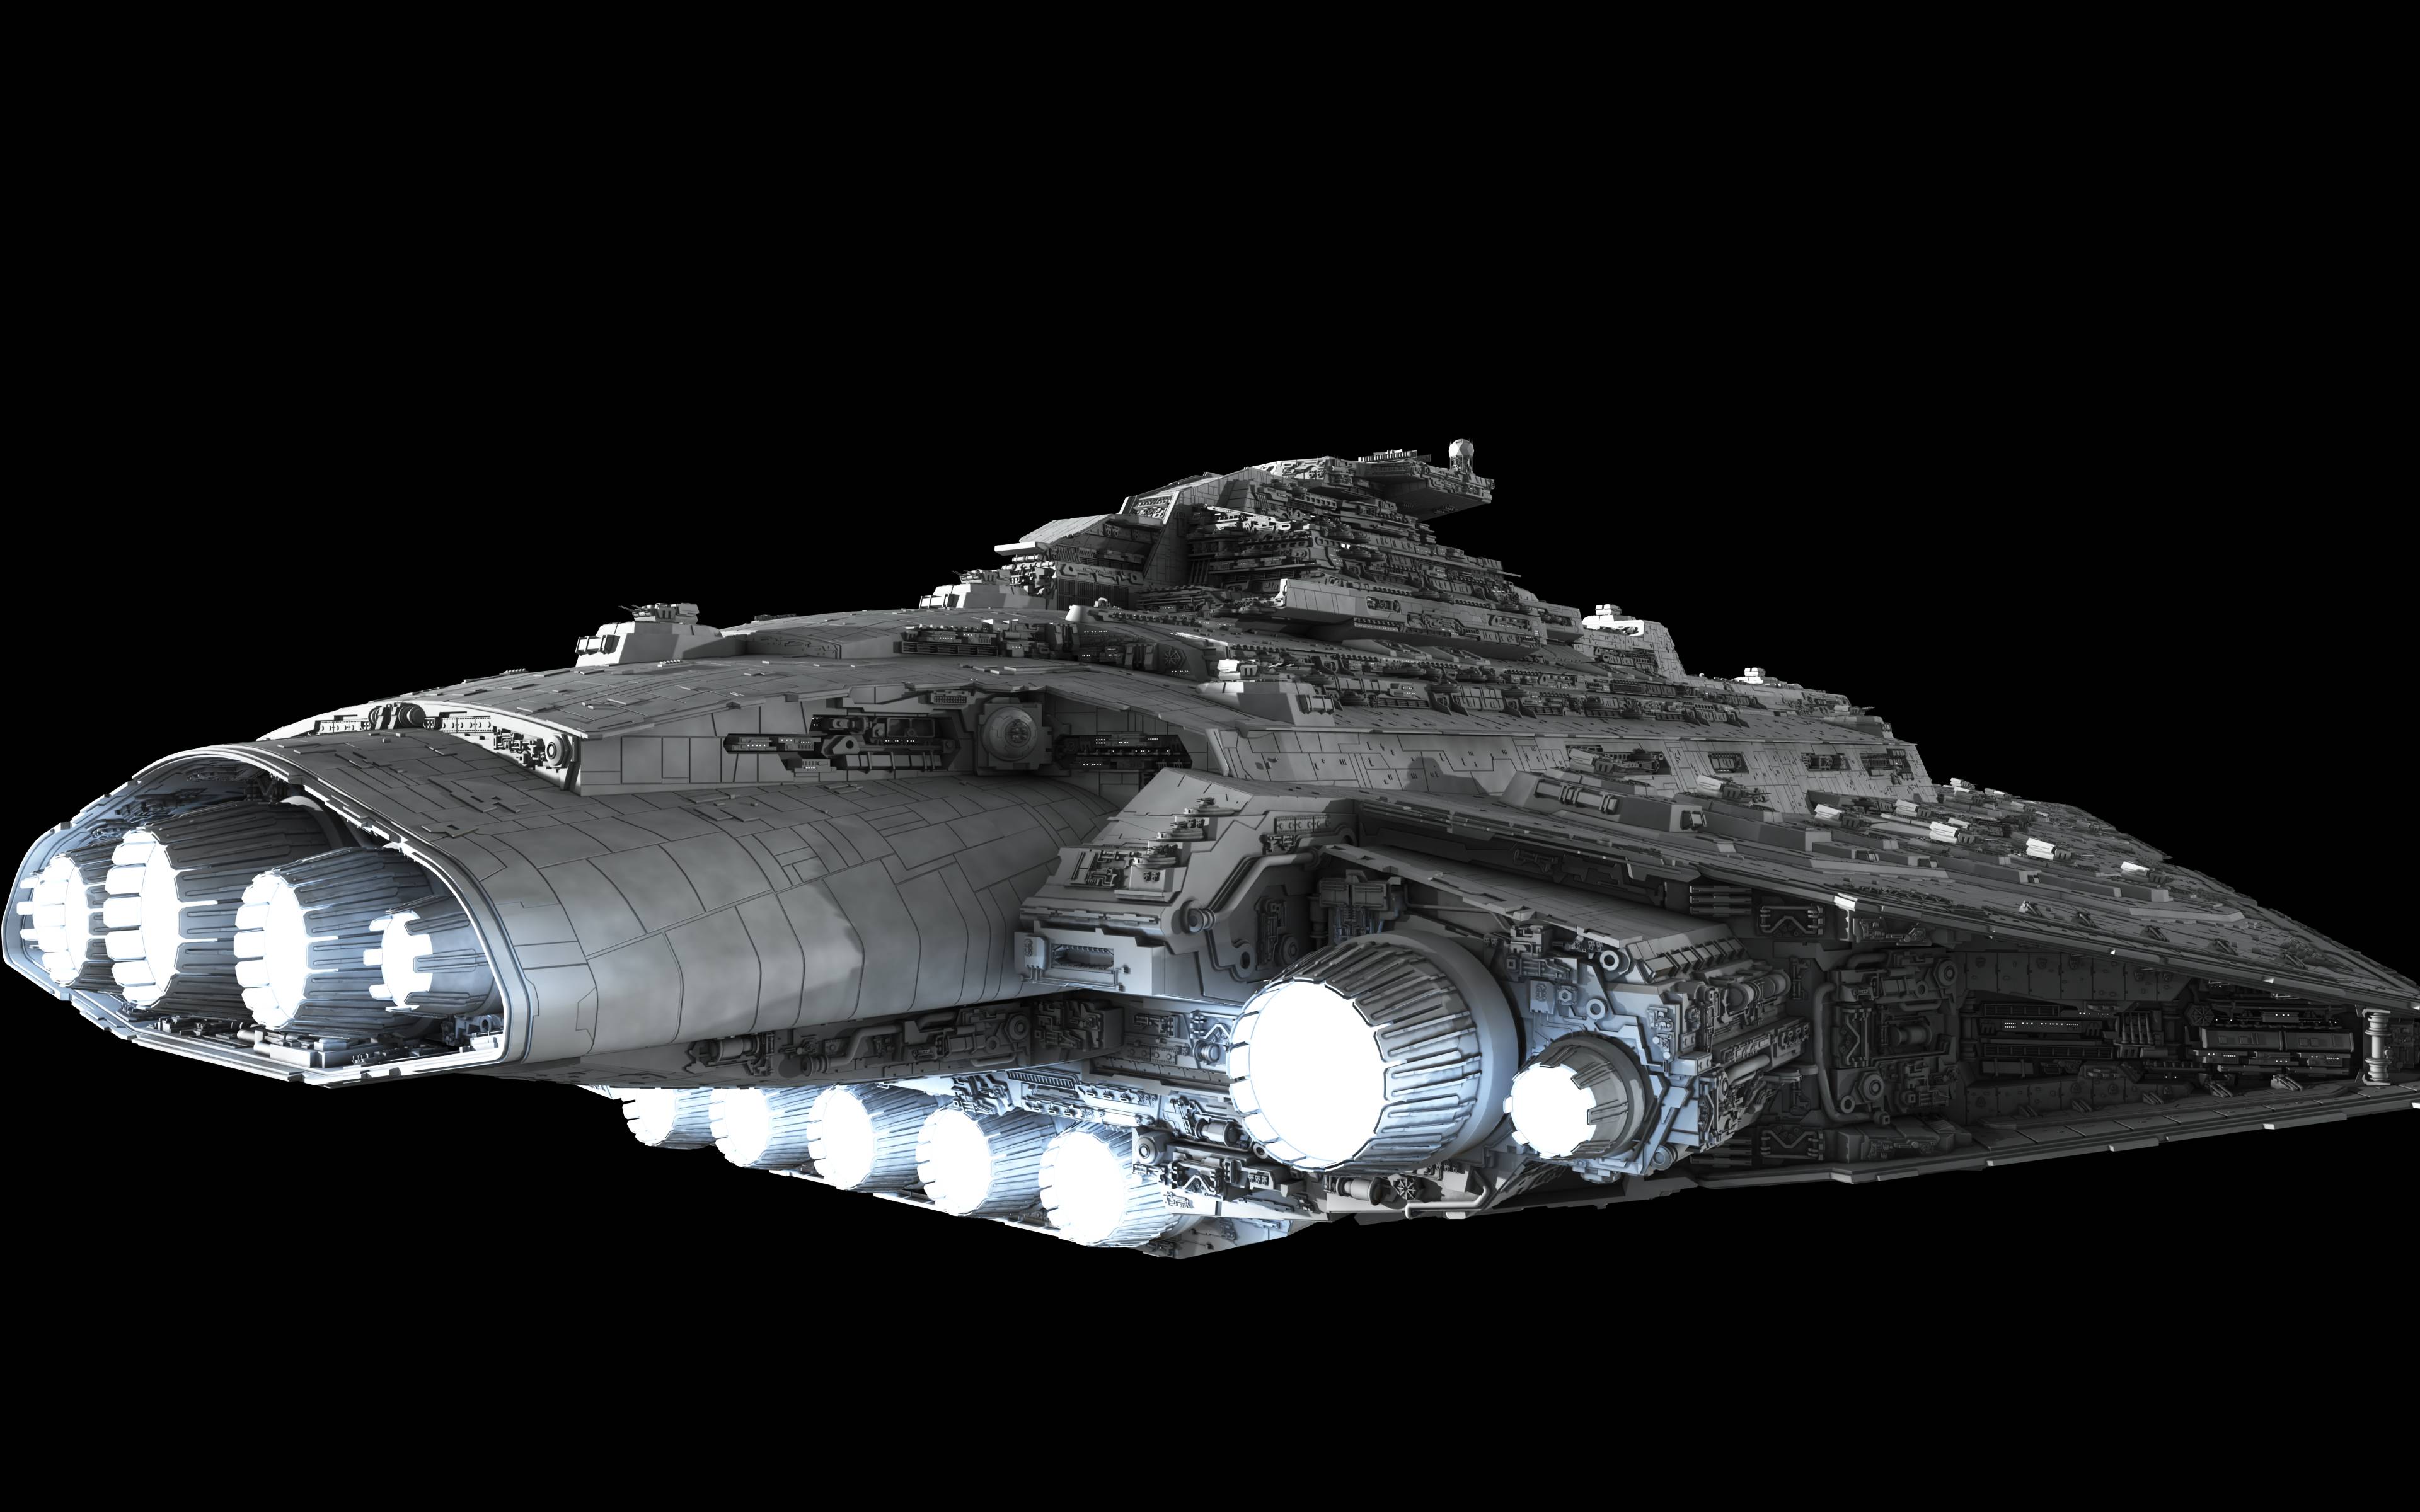 Large Hi Resolution Star Destroyer Wallpaper. So, This Is What I